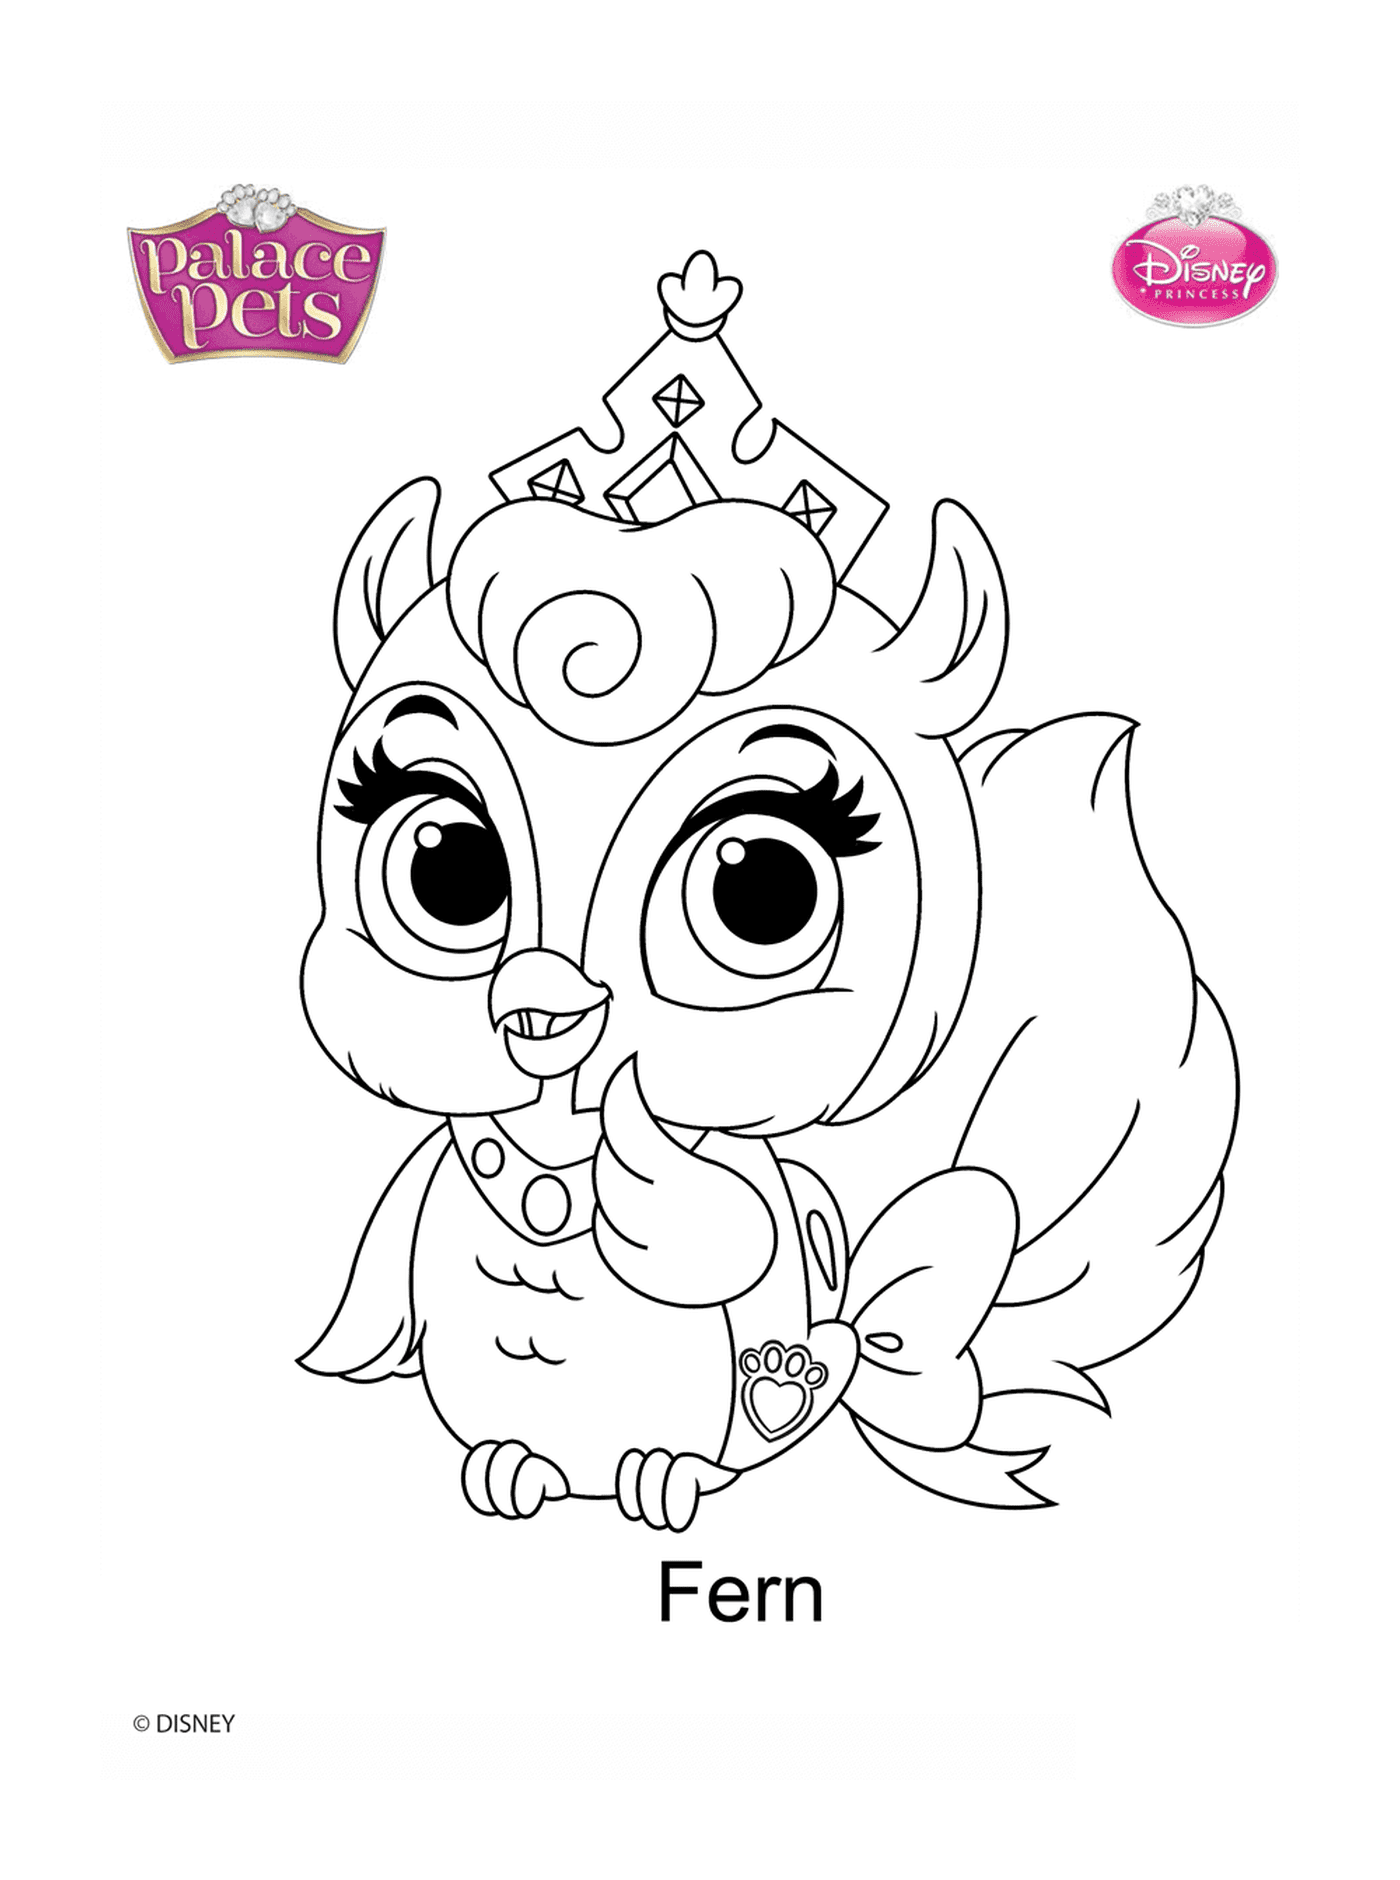  Palace farts, Fern the owl crowned 